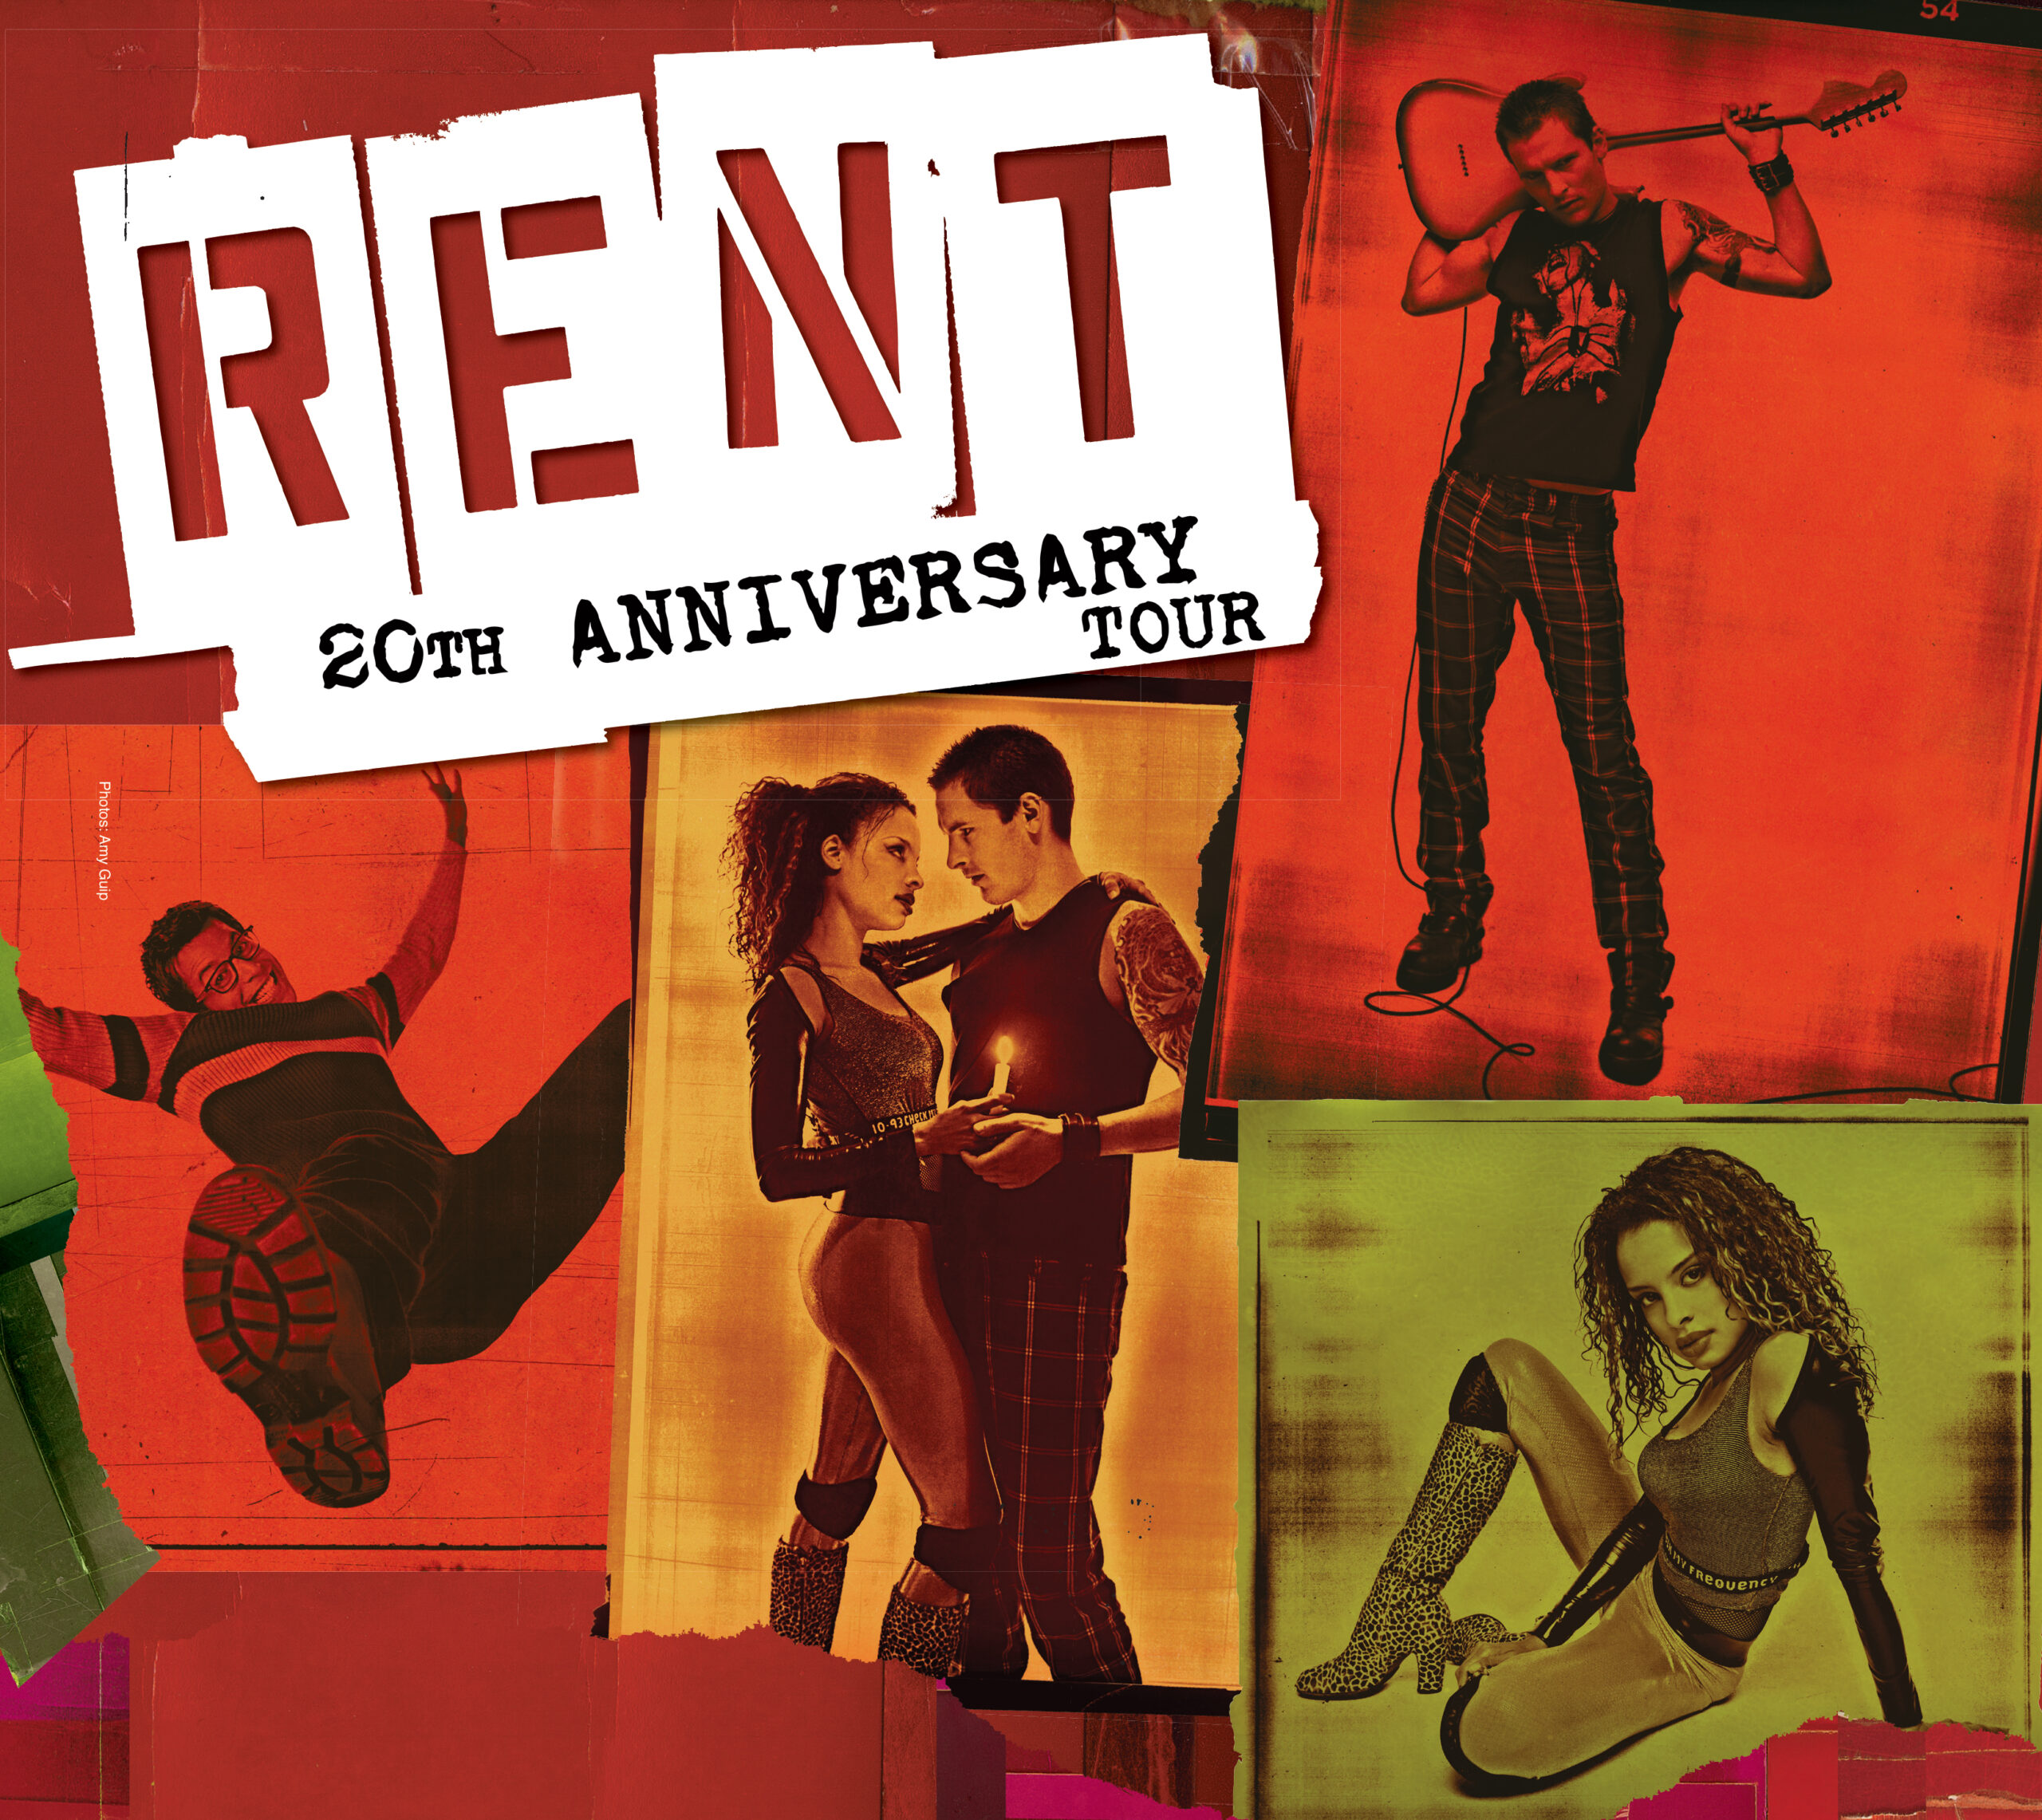 Rent 20th Anniversary Tour graphic featuring Mark, Mimi, and Roger.